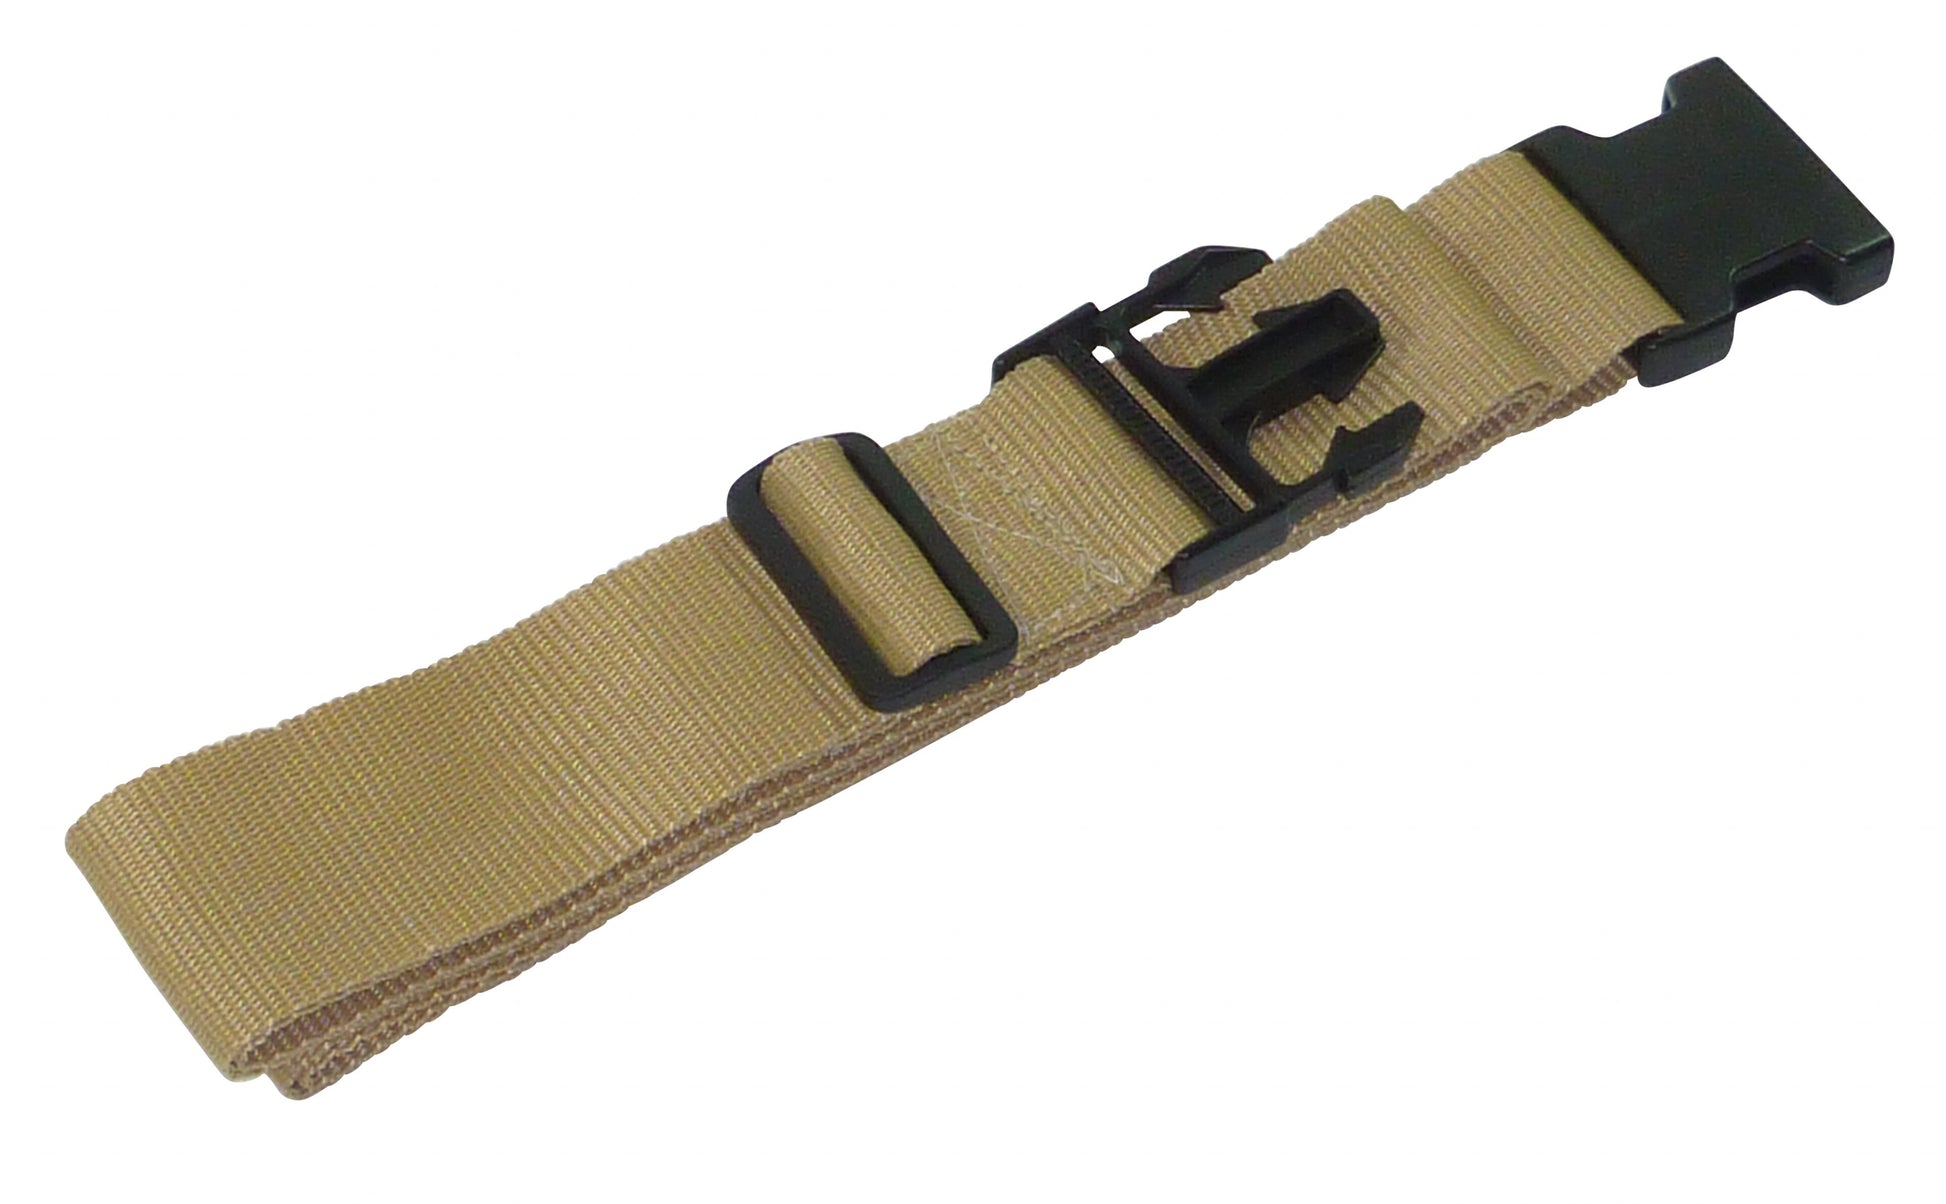 Benristraps Luggage Strap in Beige